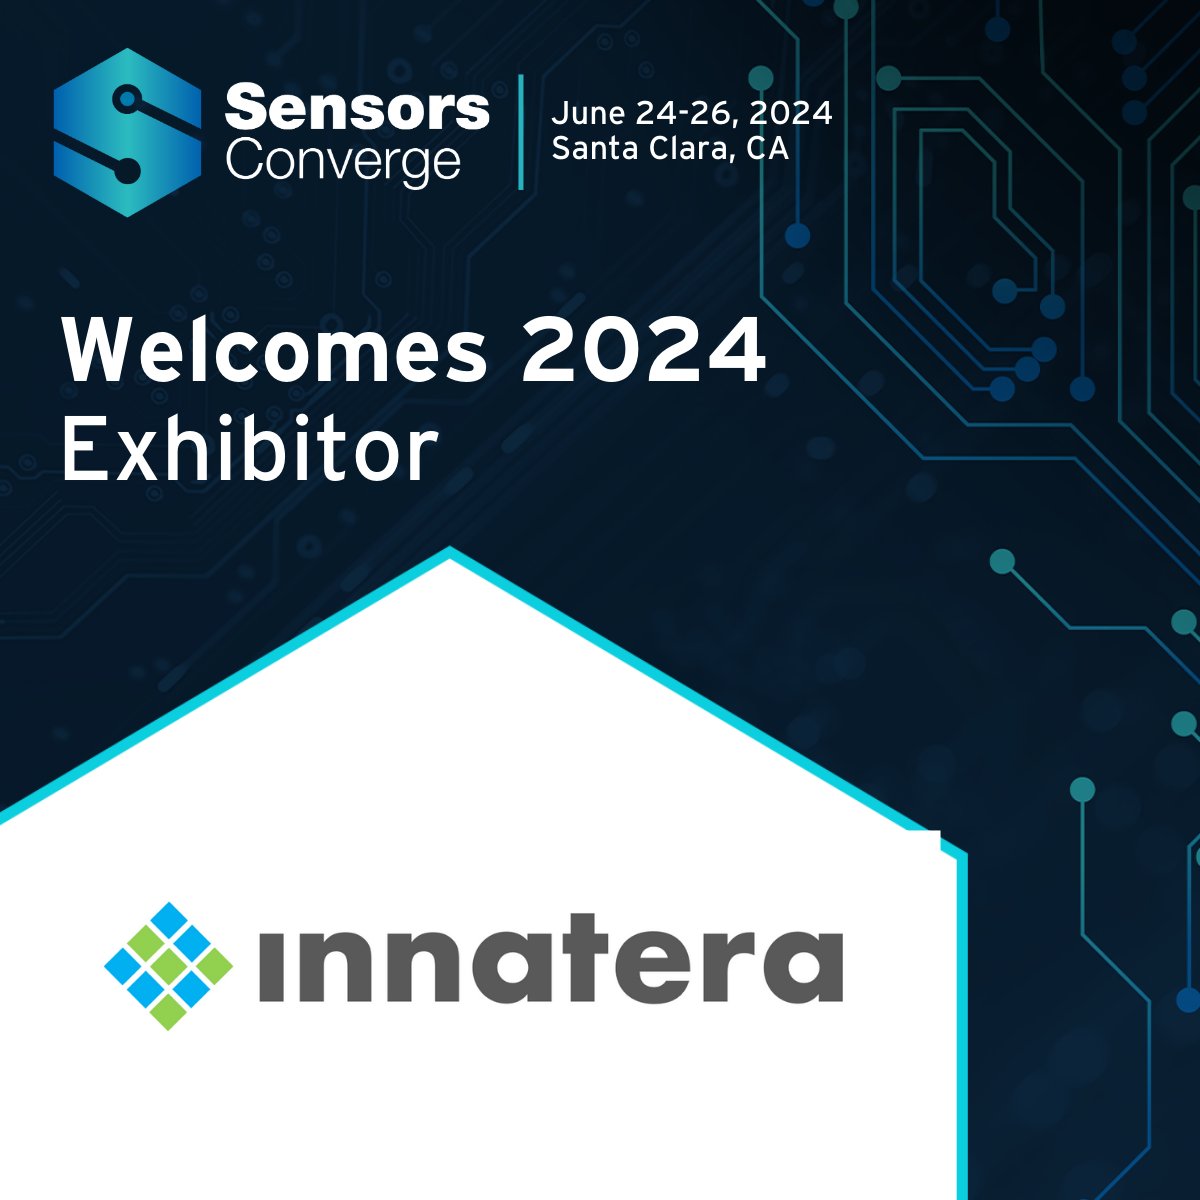 Welcome Innatera to #SensorsConverge Innatera is a Dutch semiconductor company that develops ultra-low power processors for near-sensor AI applications. Learn more: innatera.com Register now and join us this June 24-26 in Santa Clara sensorsconverge.com/sensorsconverg… #sensors